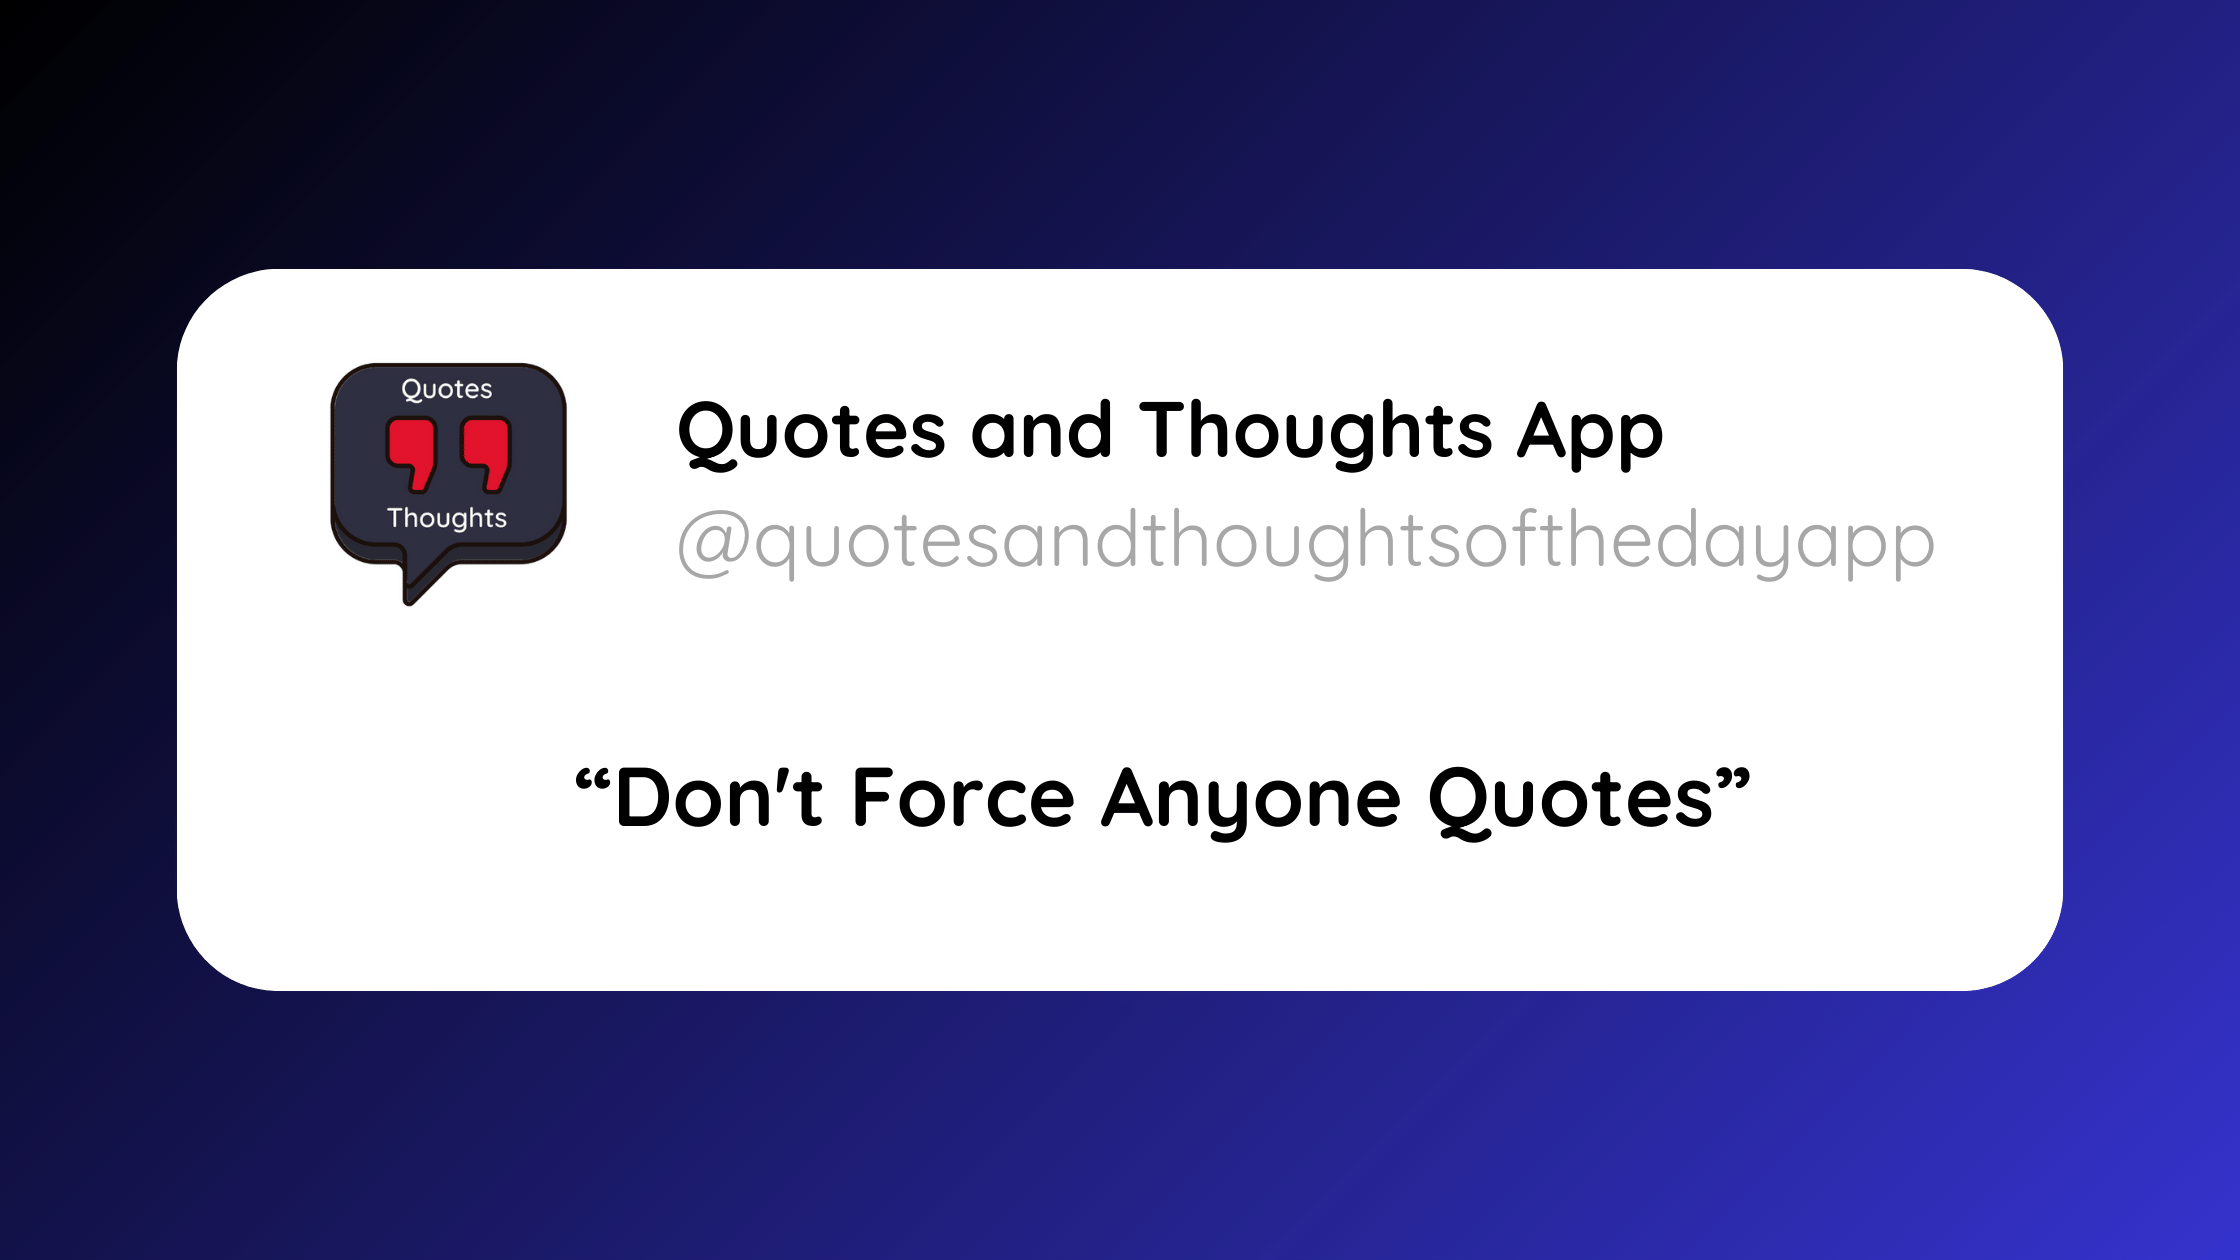 "Don't Force Anyone" Quotes